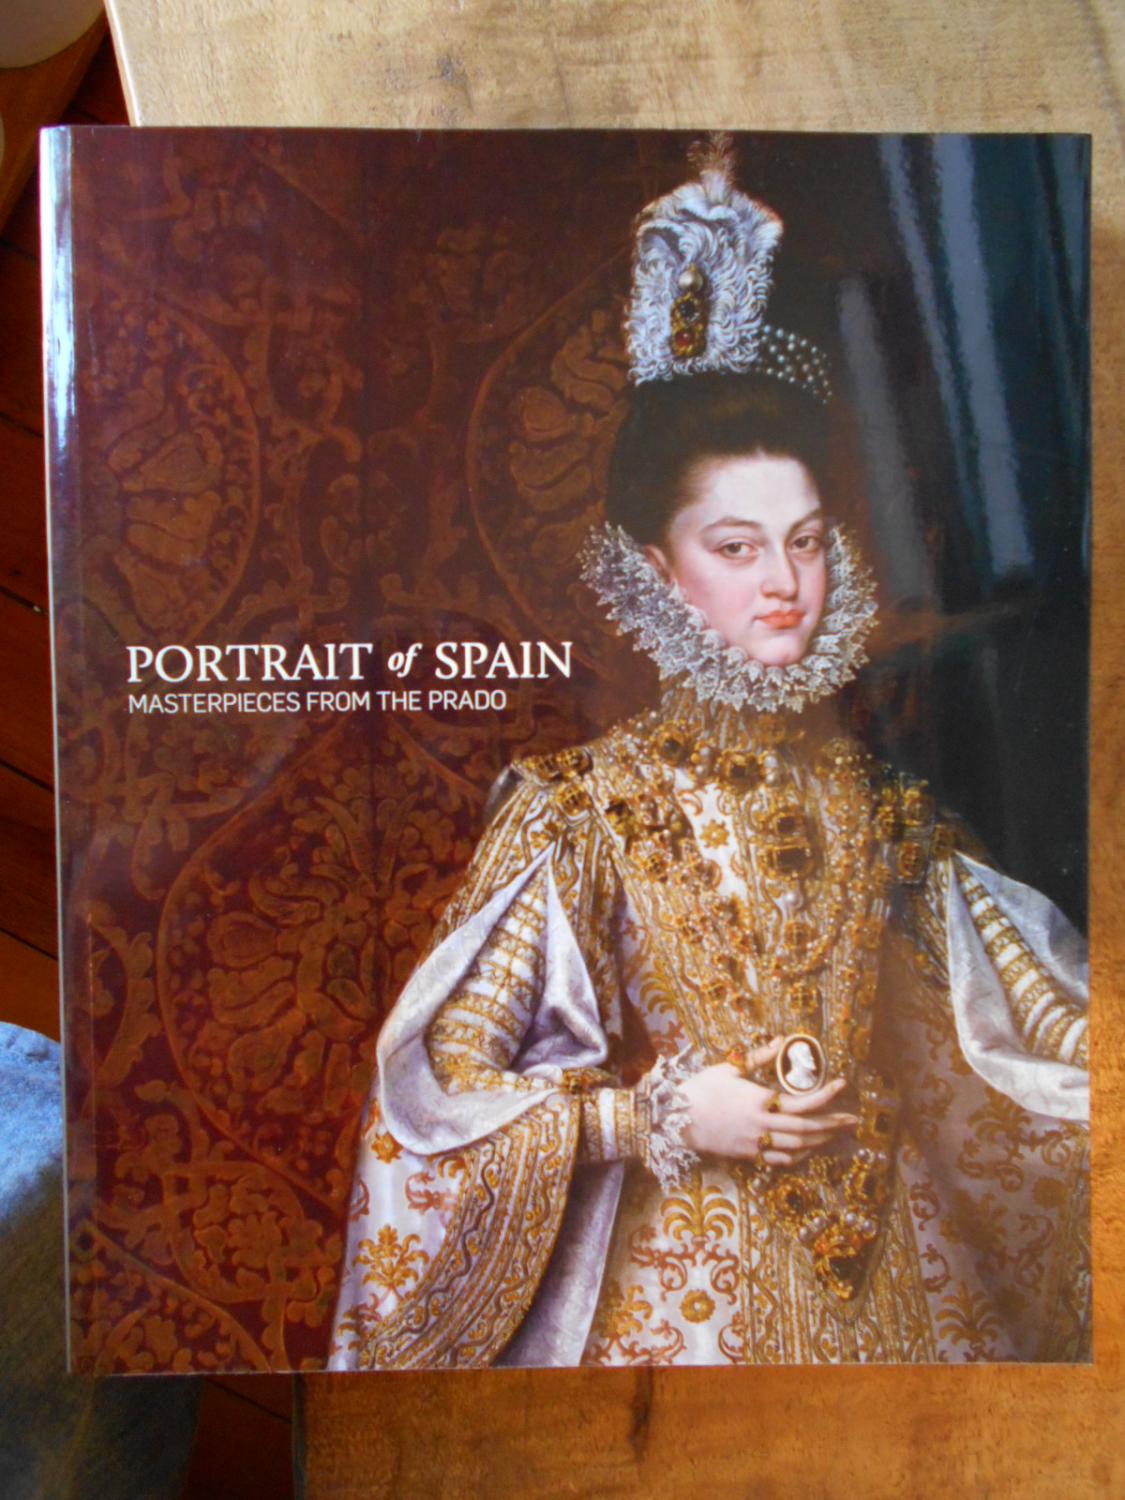 Portrait of Spain: Masterpieces from the Prado